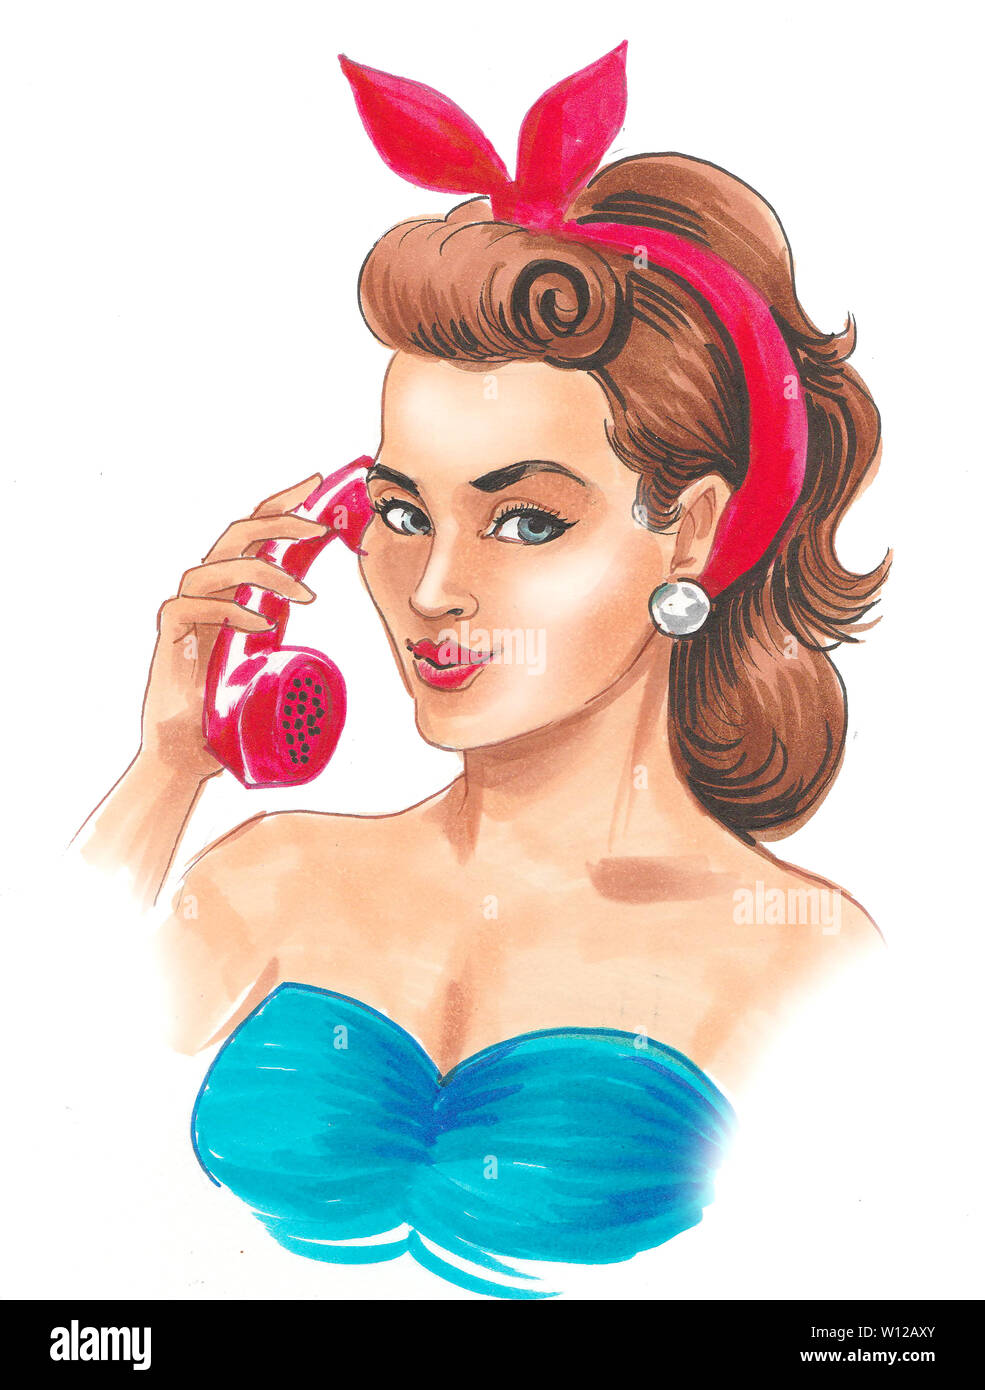 Pretty woman with a pin up styled hair talking over the red ...